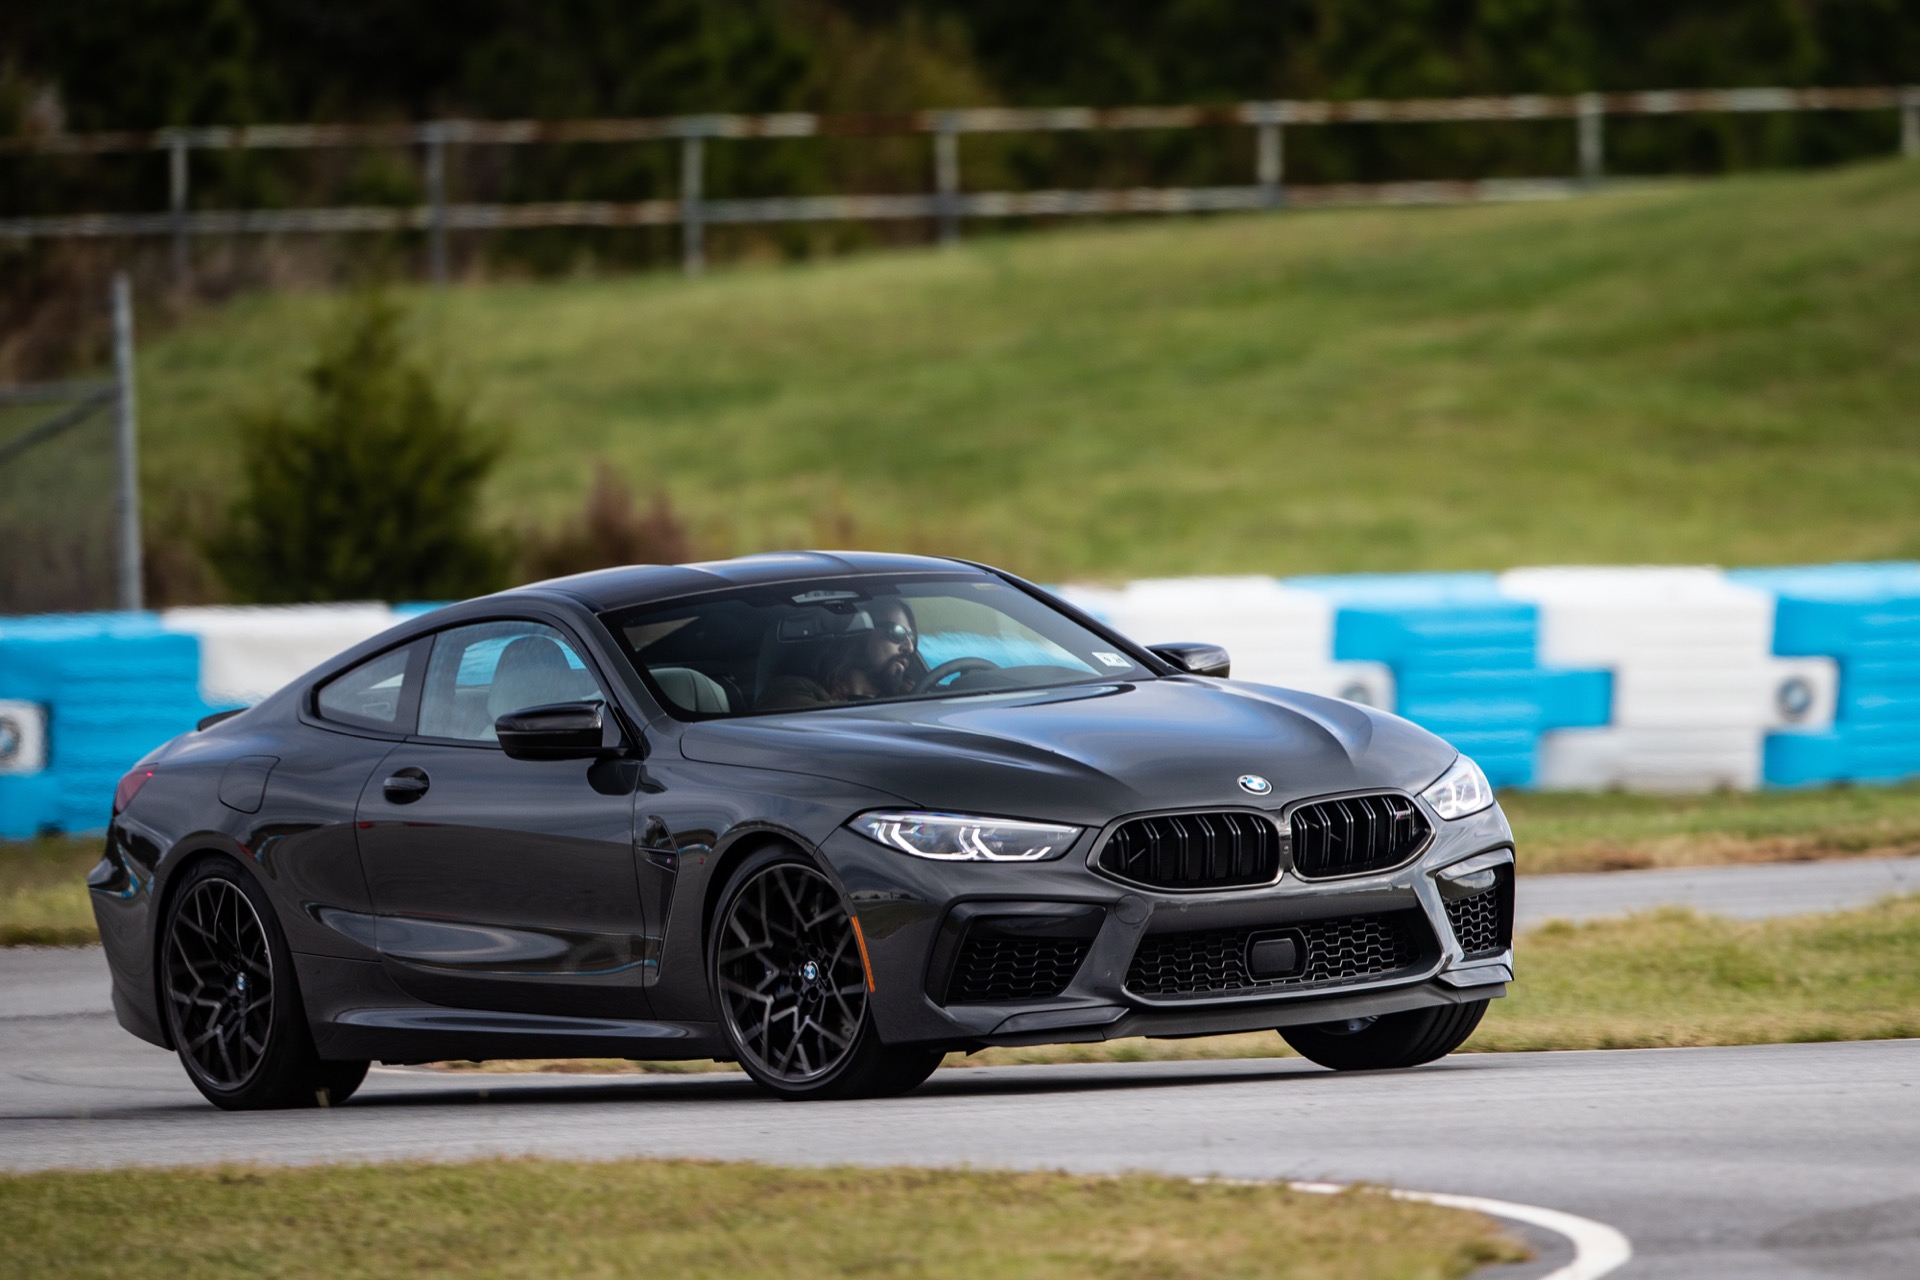 First drive review: The 2020 BMW M8 may be a large coupe, but it cooksFirst drive review: The 2020 BMW M8 may be a large coupe, but it cooks